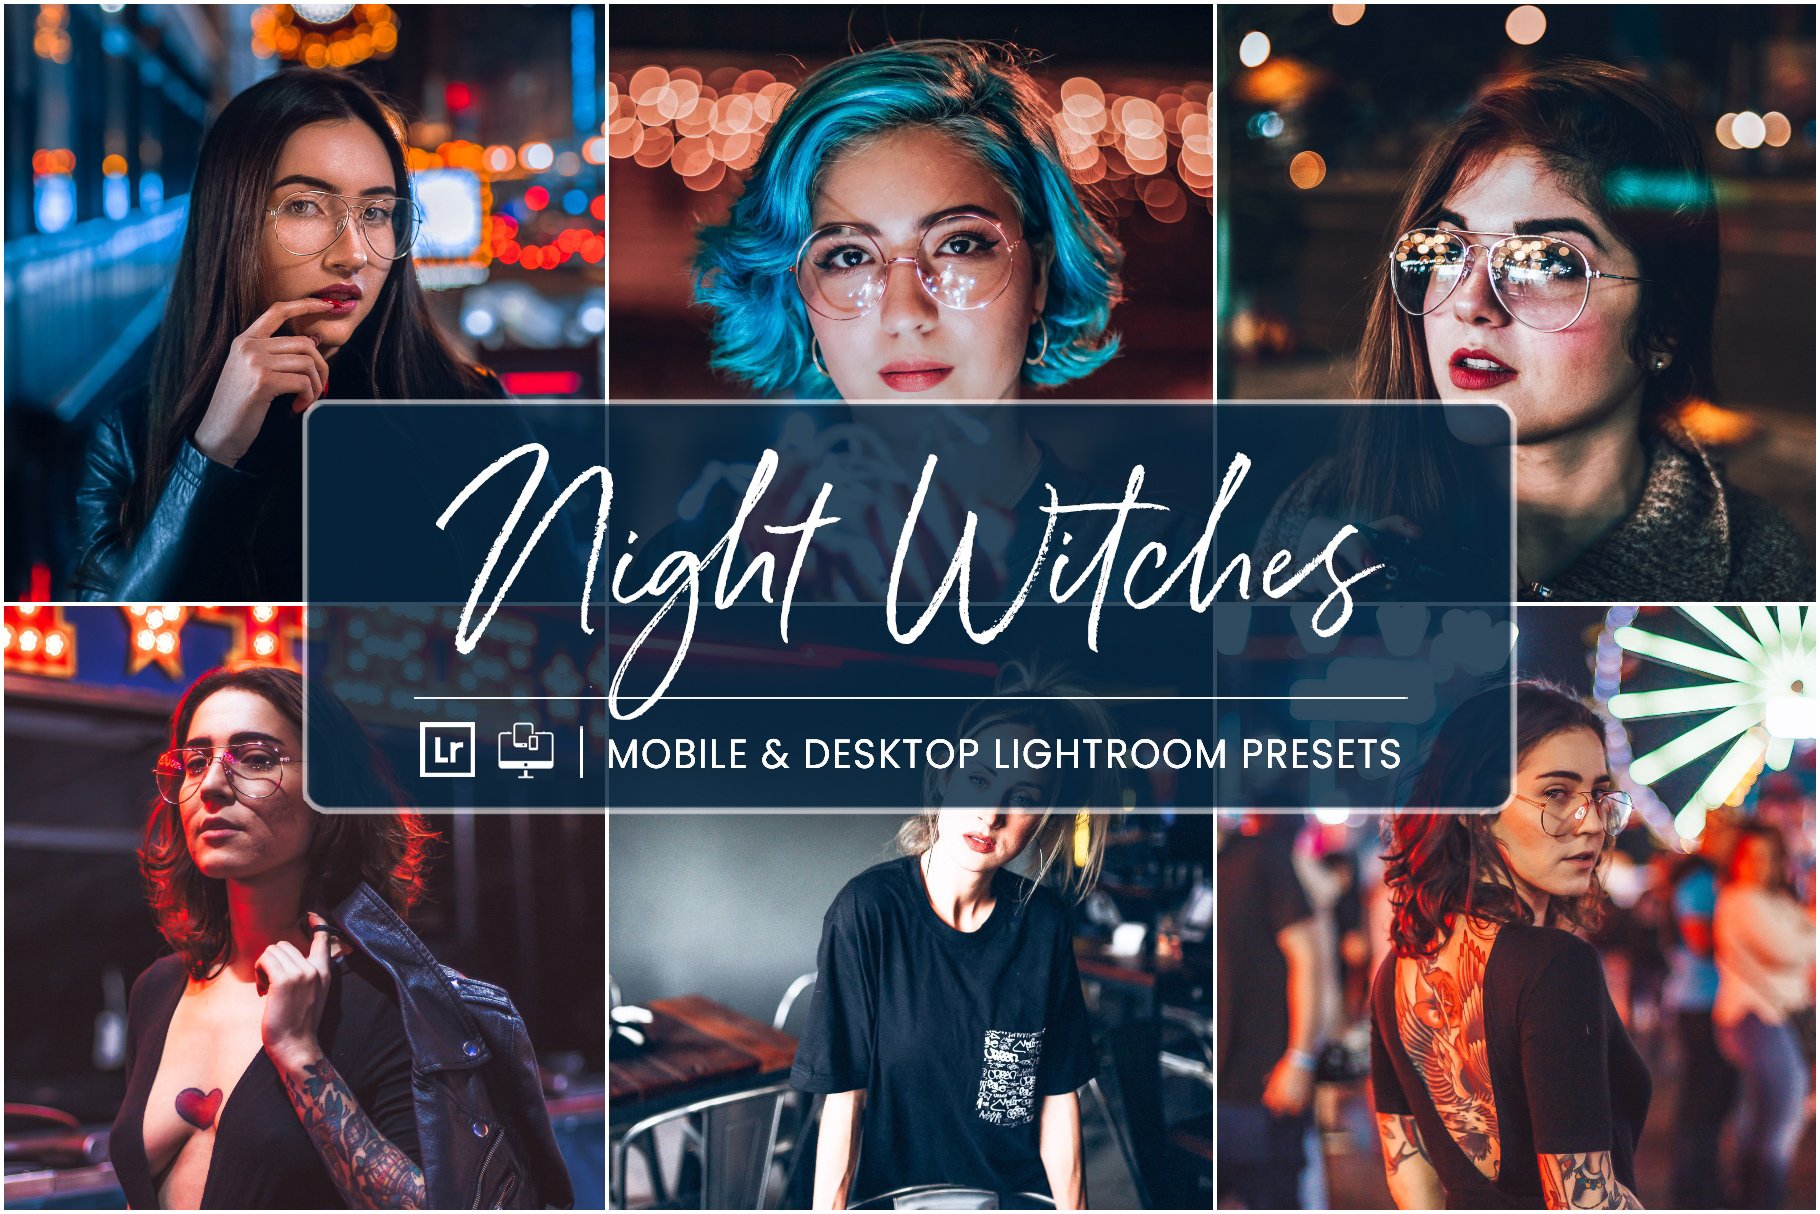 NIGHT WITCHES LIGHTROOM PRESETScover image.